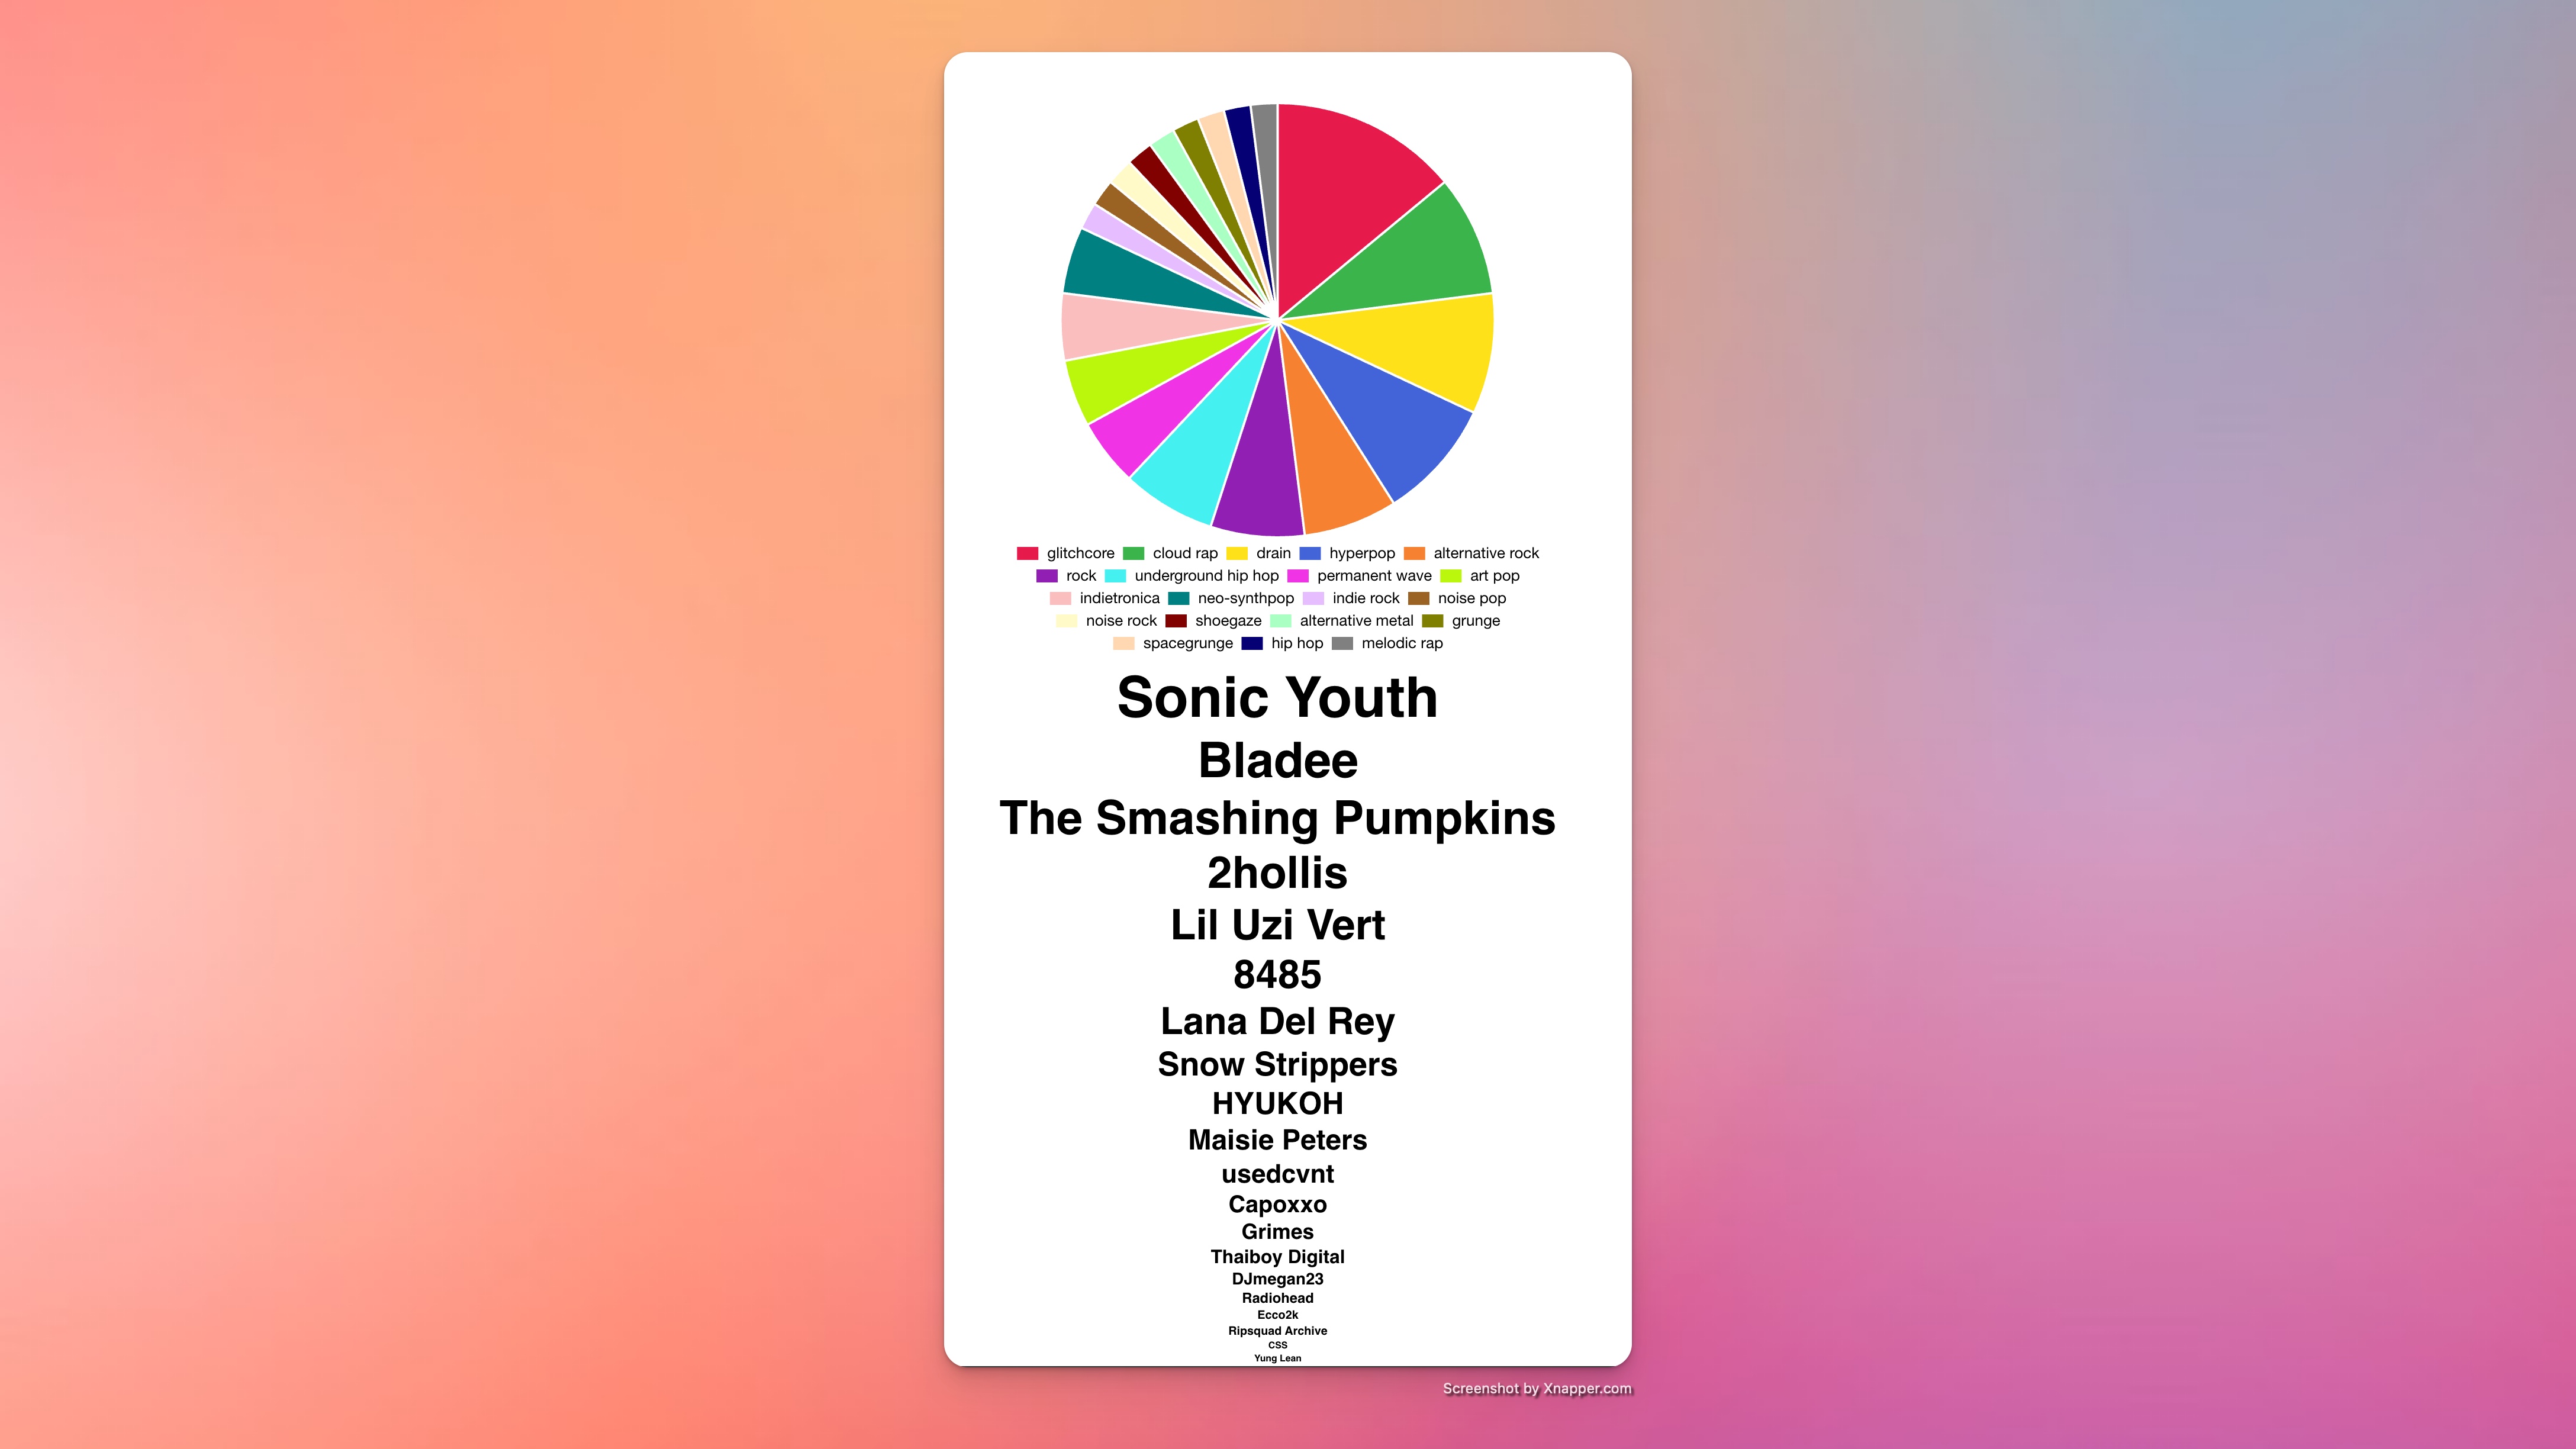 The generated pie chart tells your Spotify listening habits by genres and top artists.